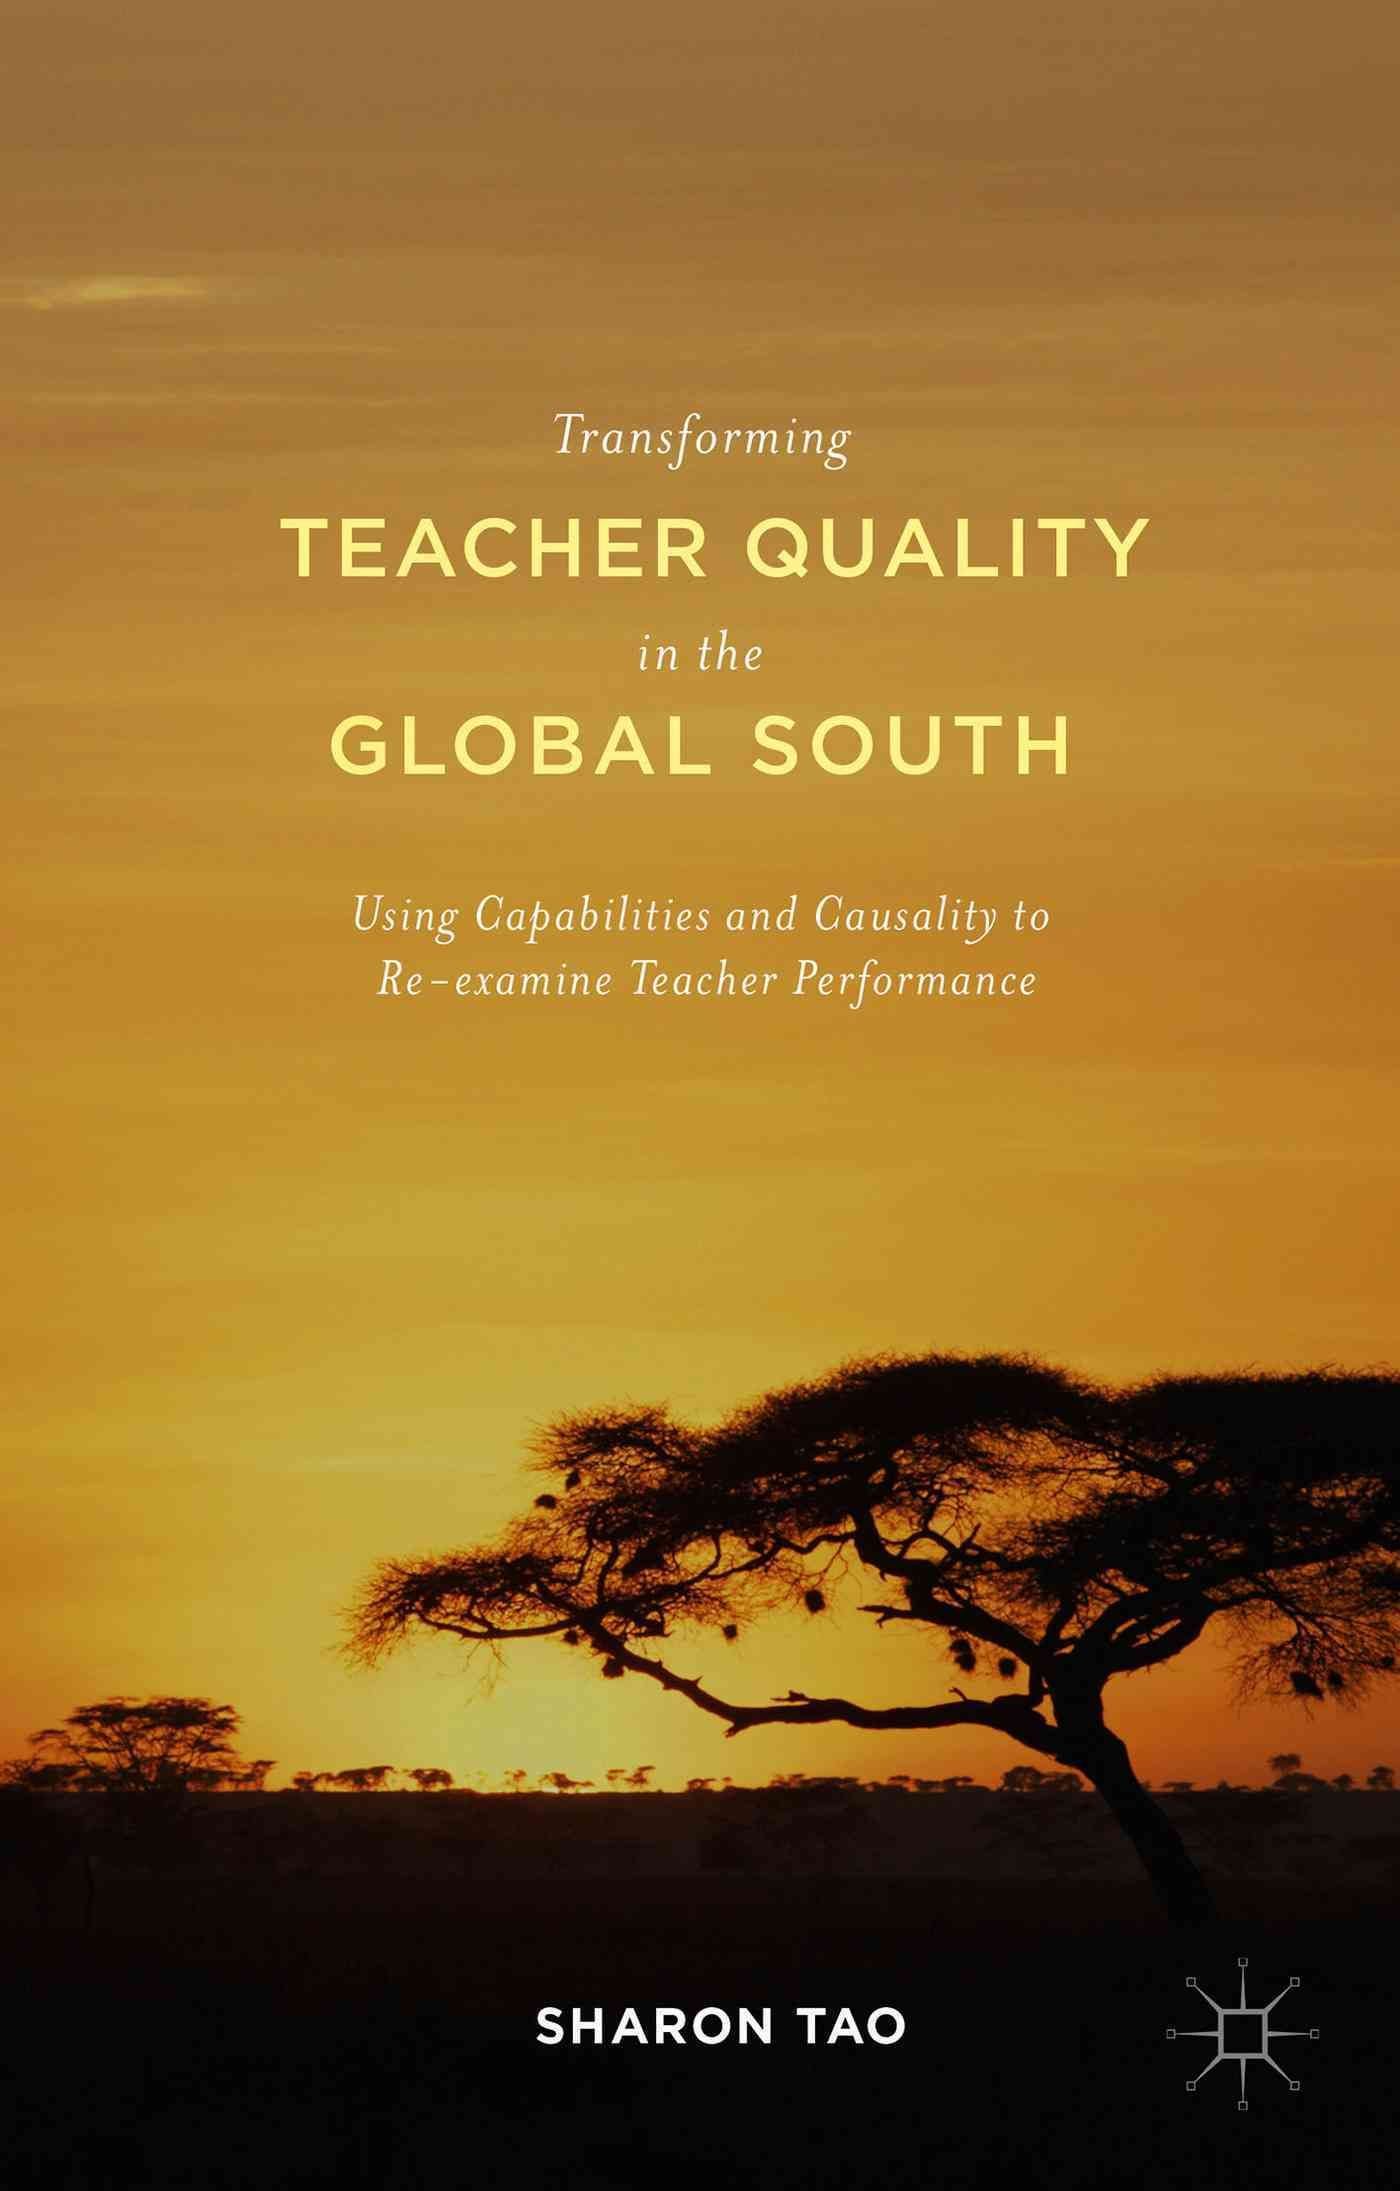 Transforming Teacher Quality in the Global South